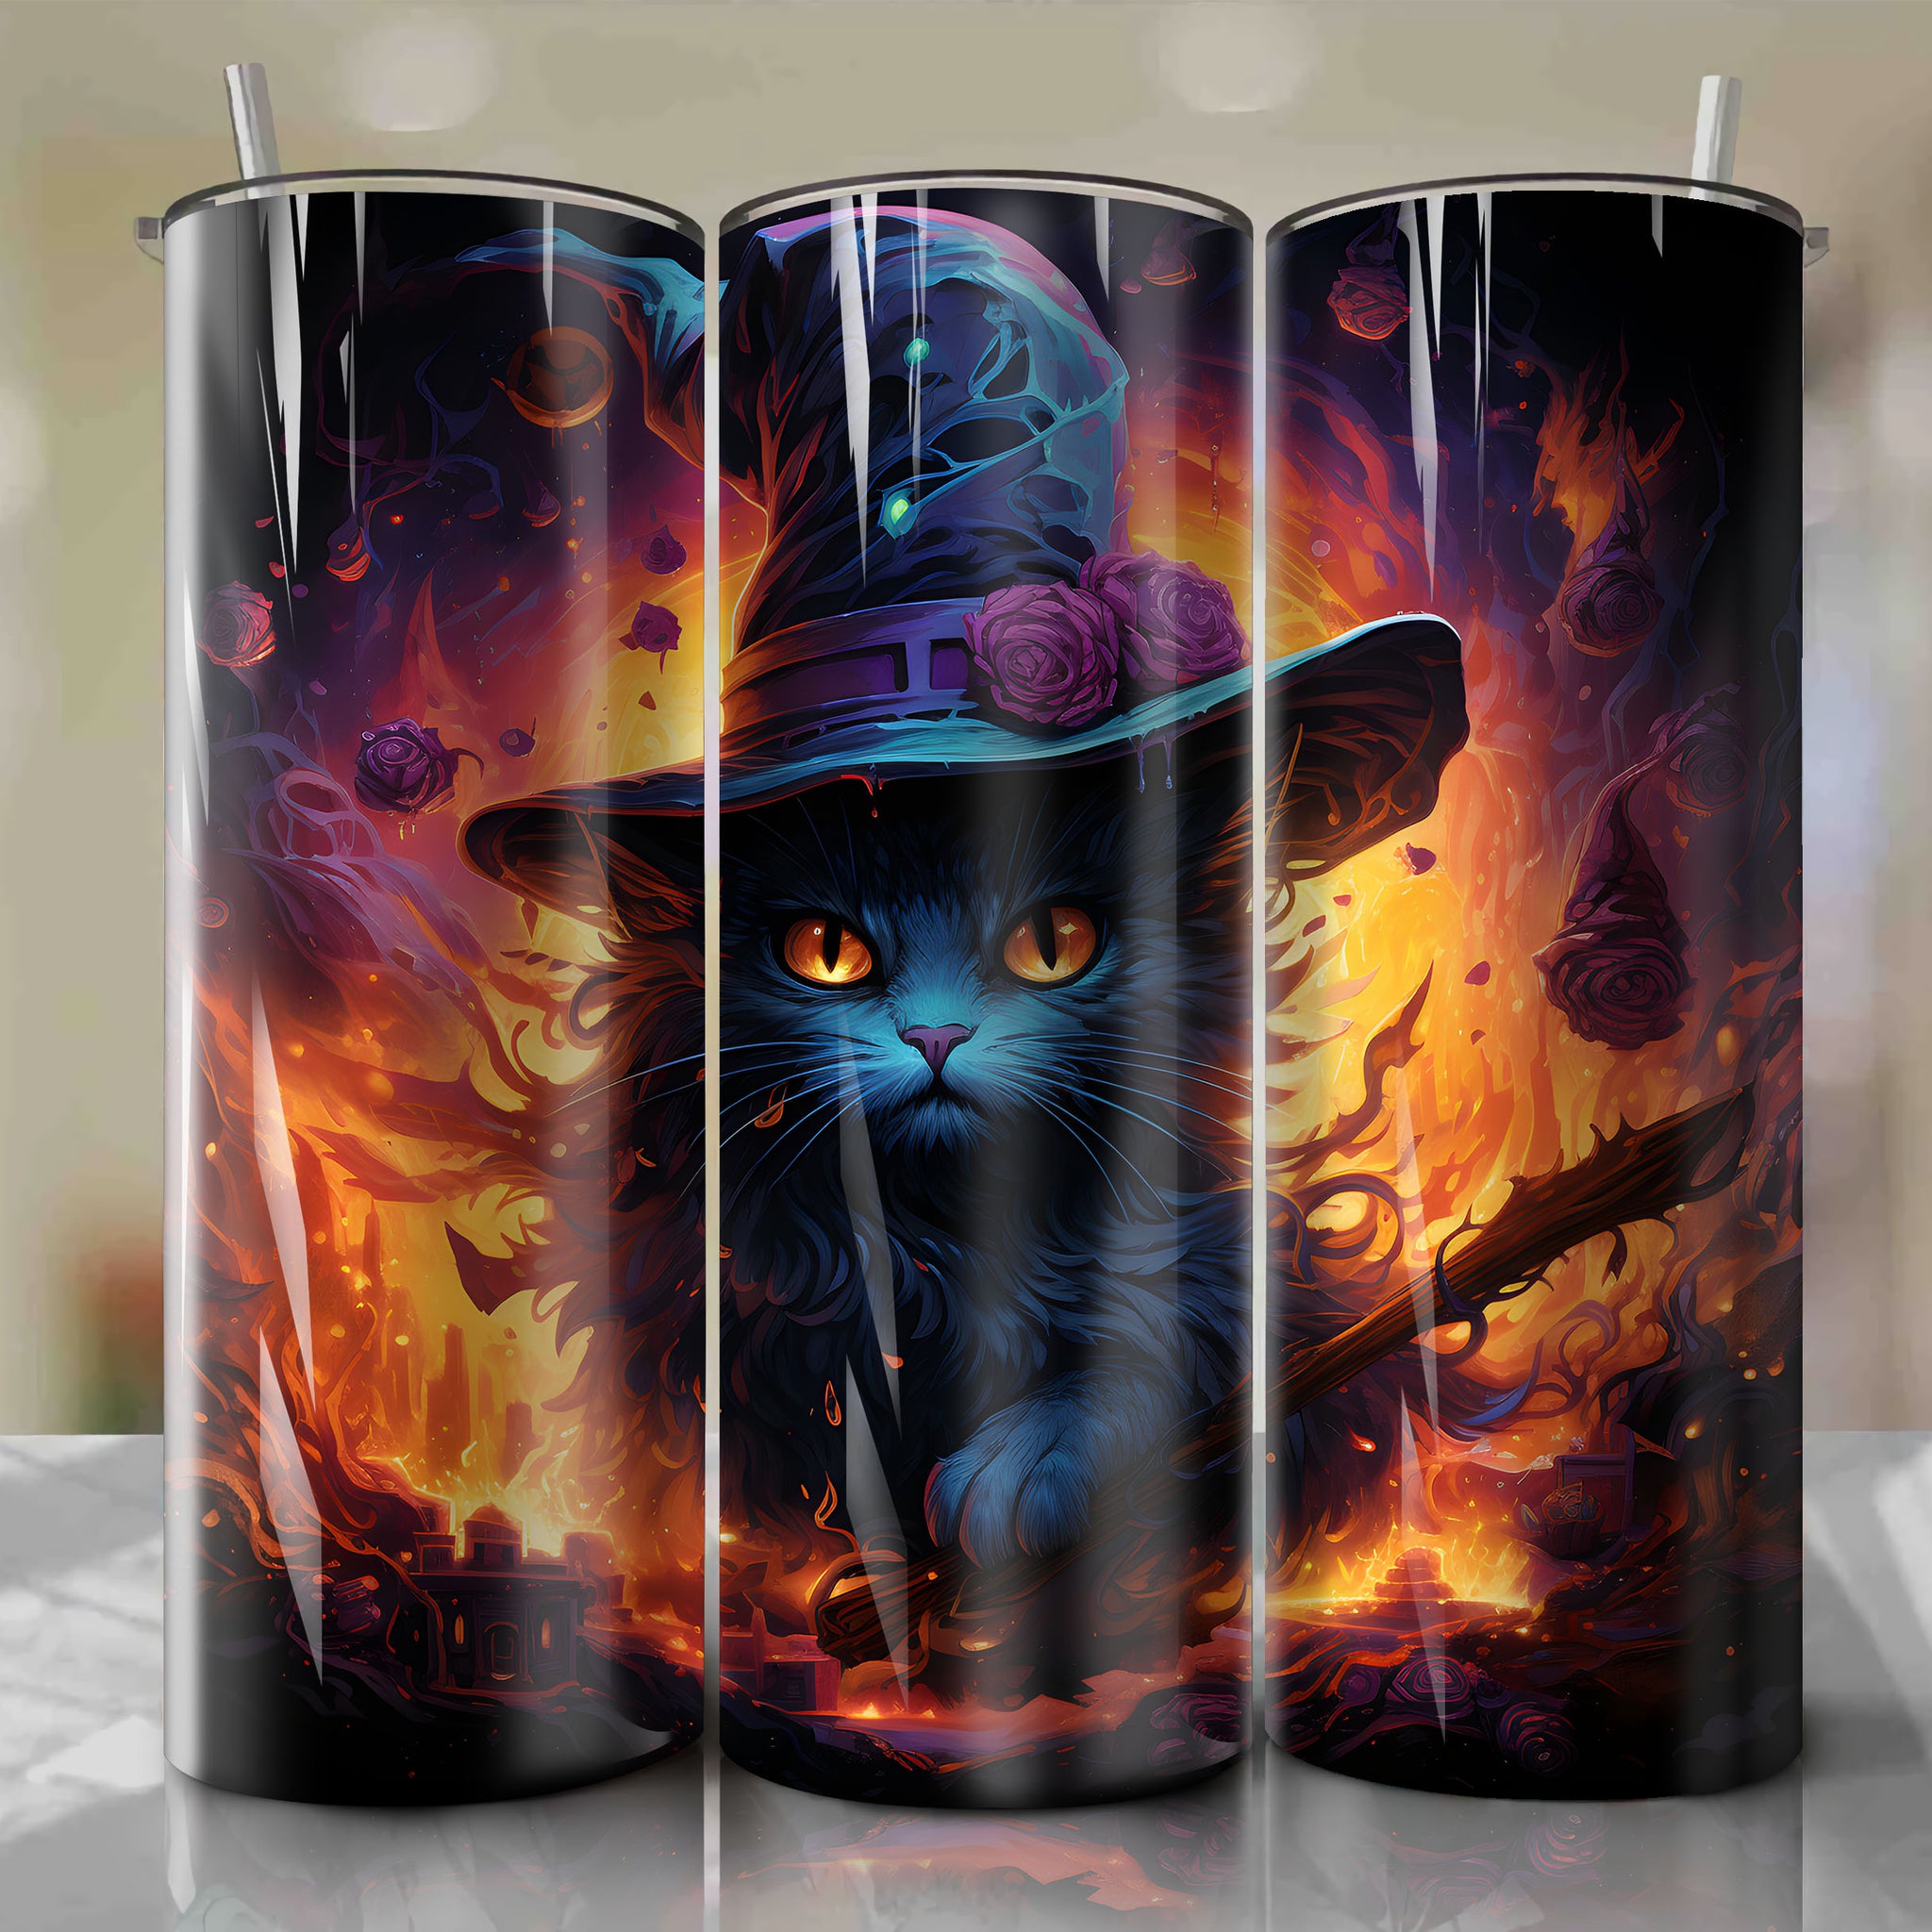 Whimsical 3D Tumbler Wrap - Black Cat Leaping from Split Witch's Hat